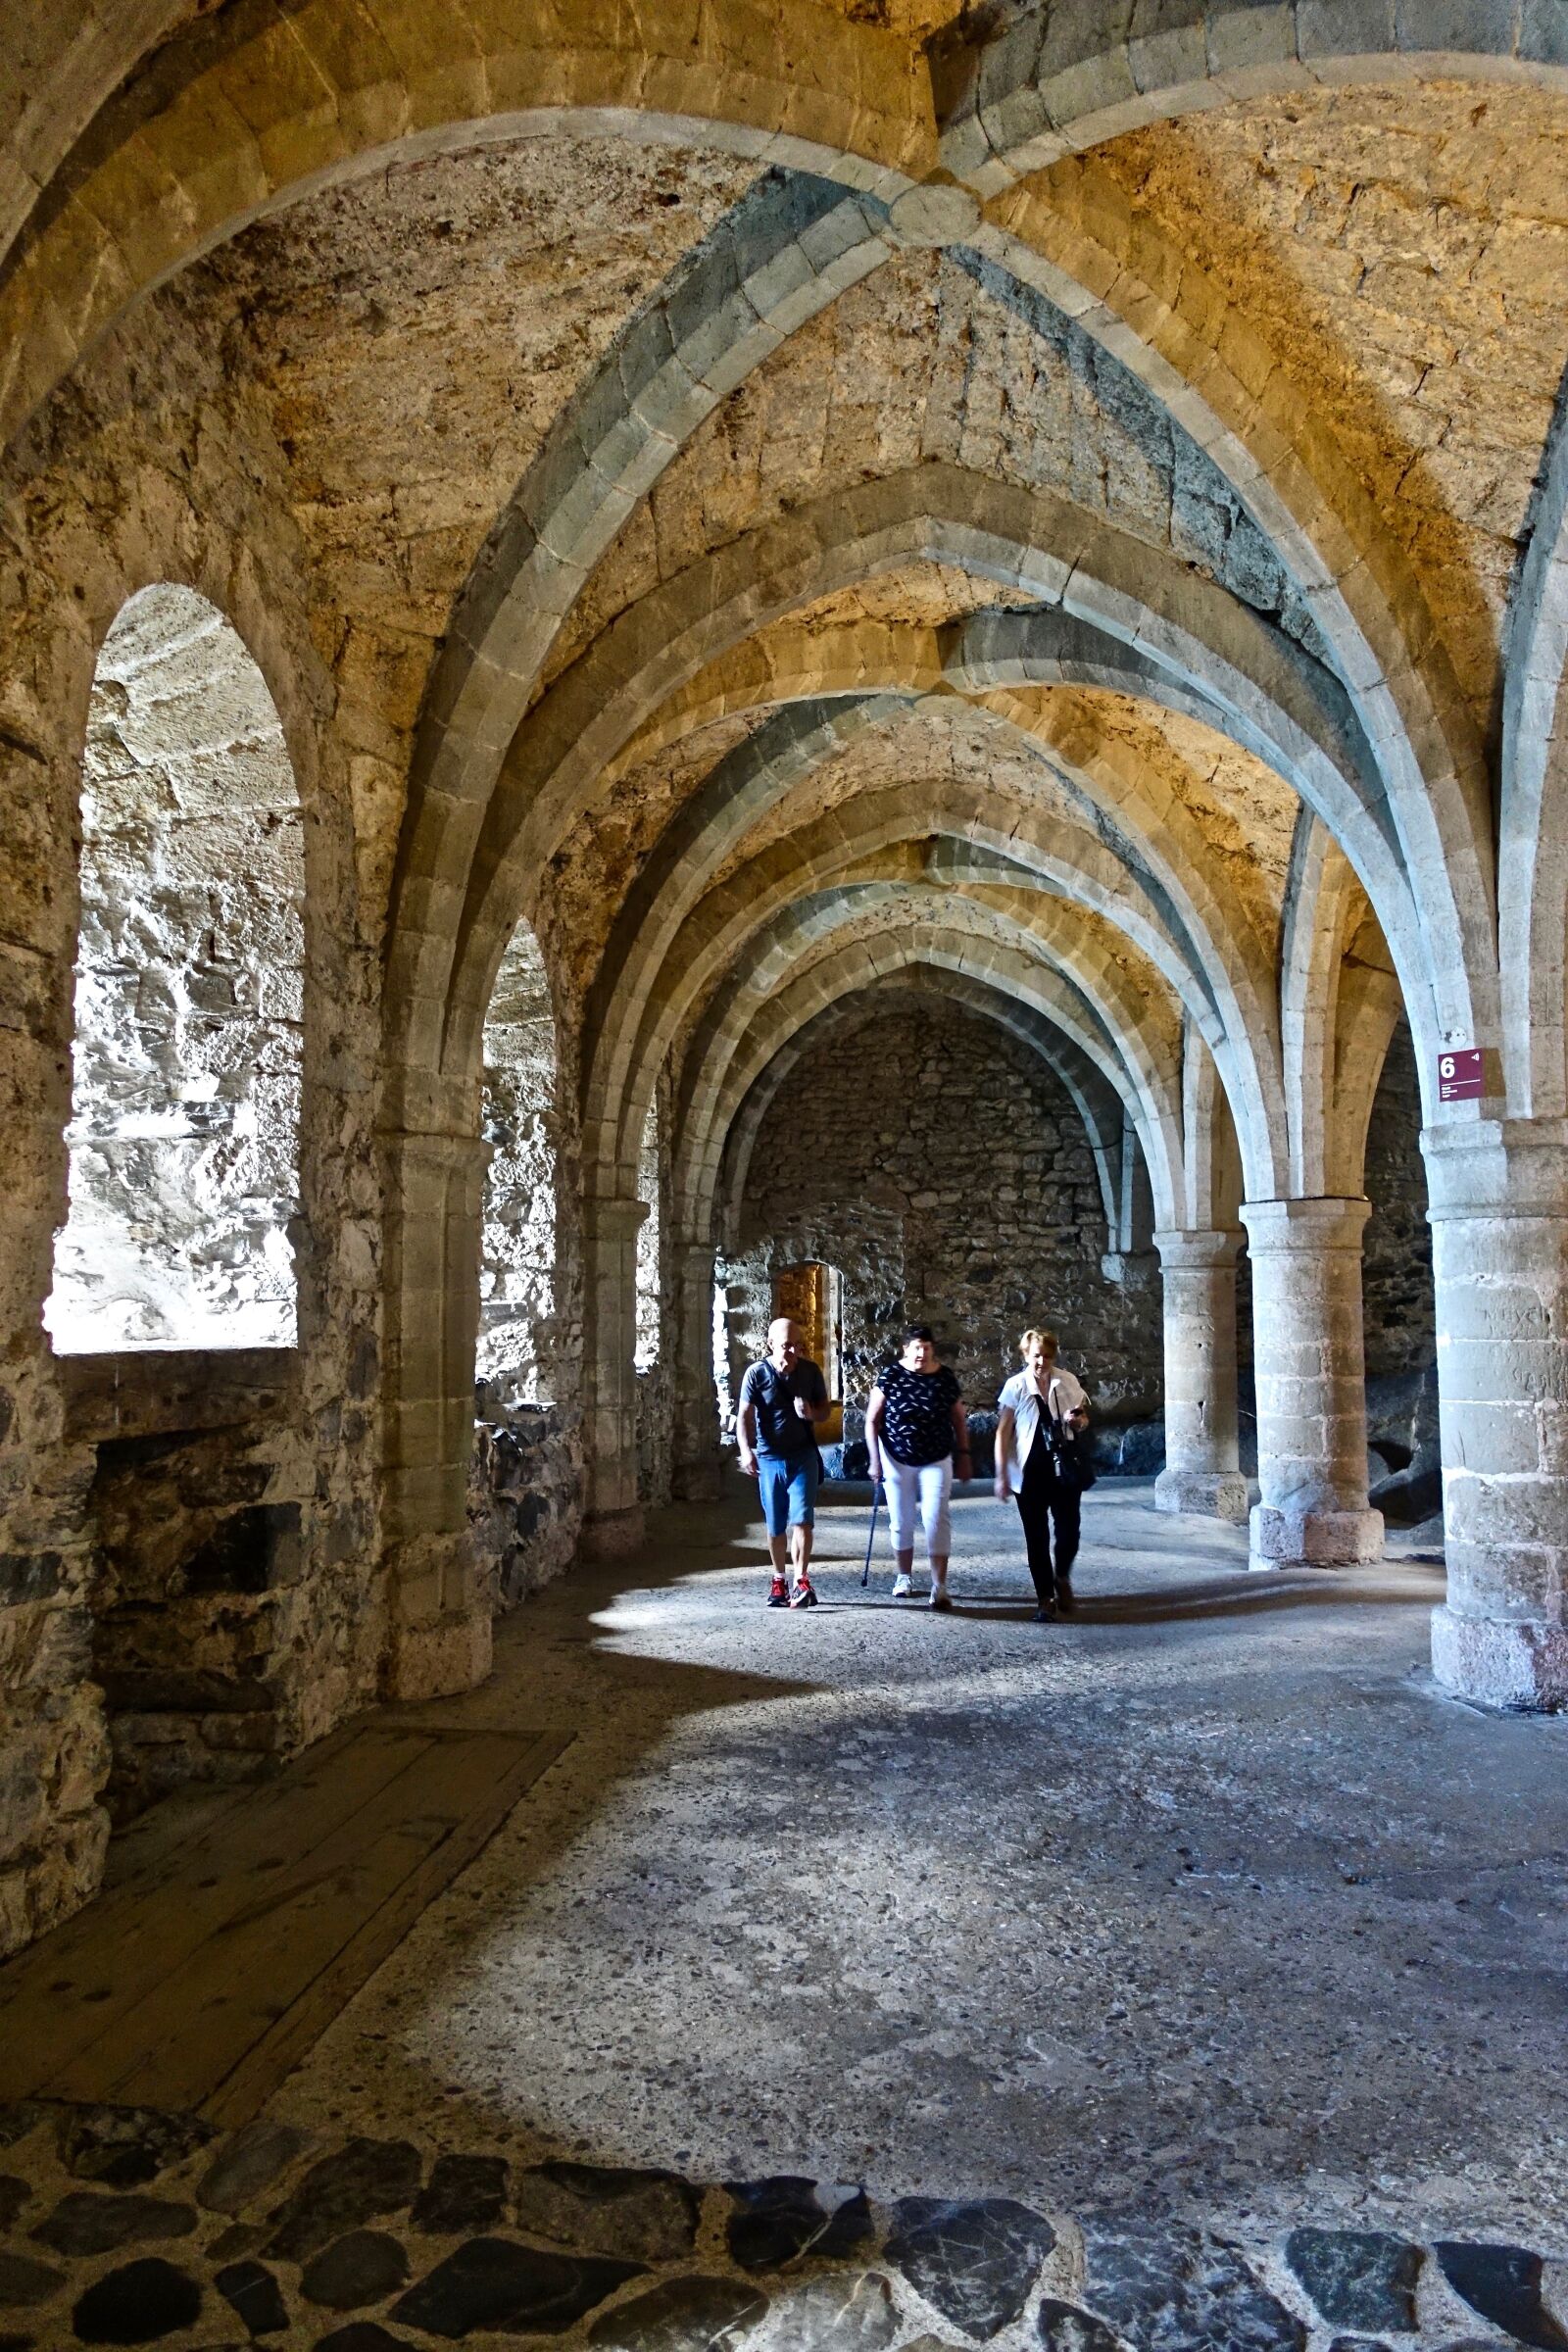 Sony Cyber-shot DSC-RX100 III sample photo. Arches, cloisters, church photography